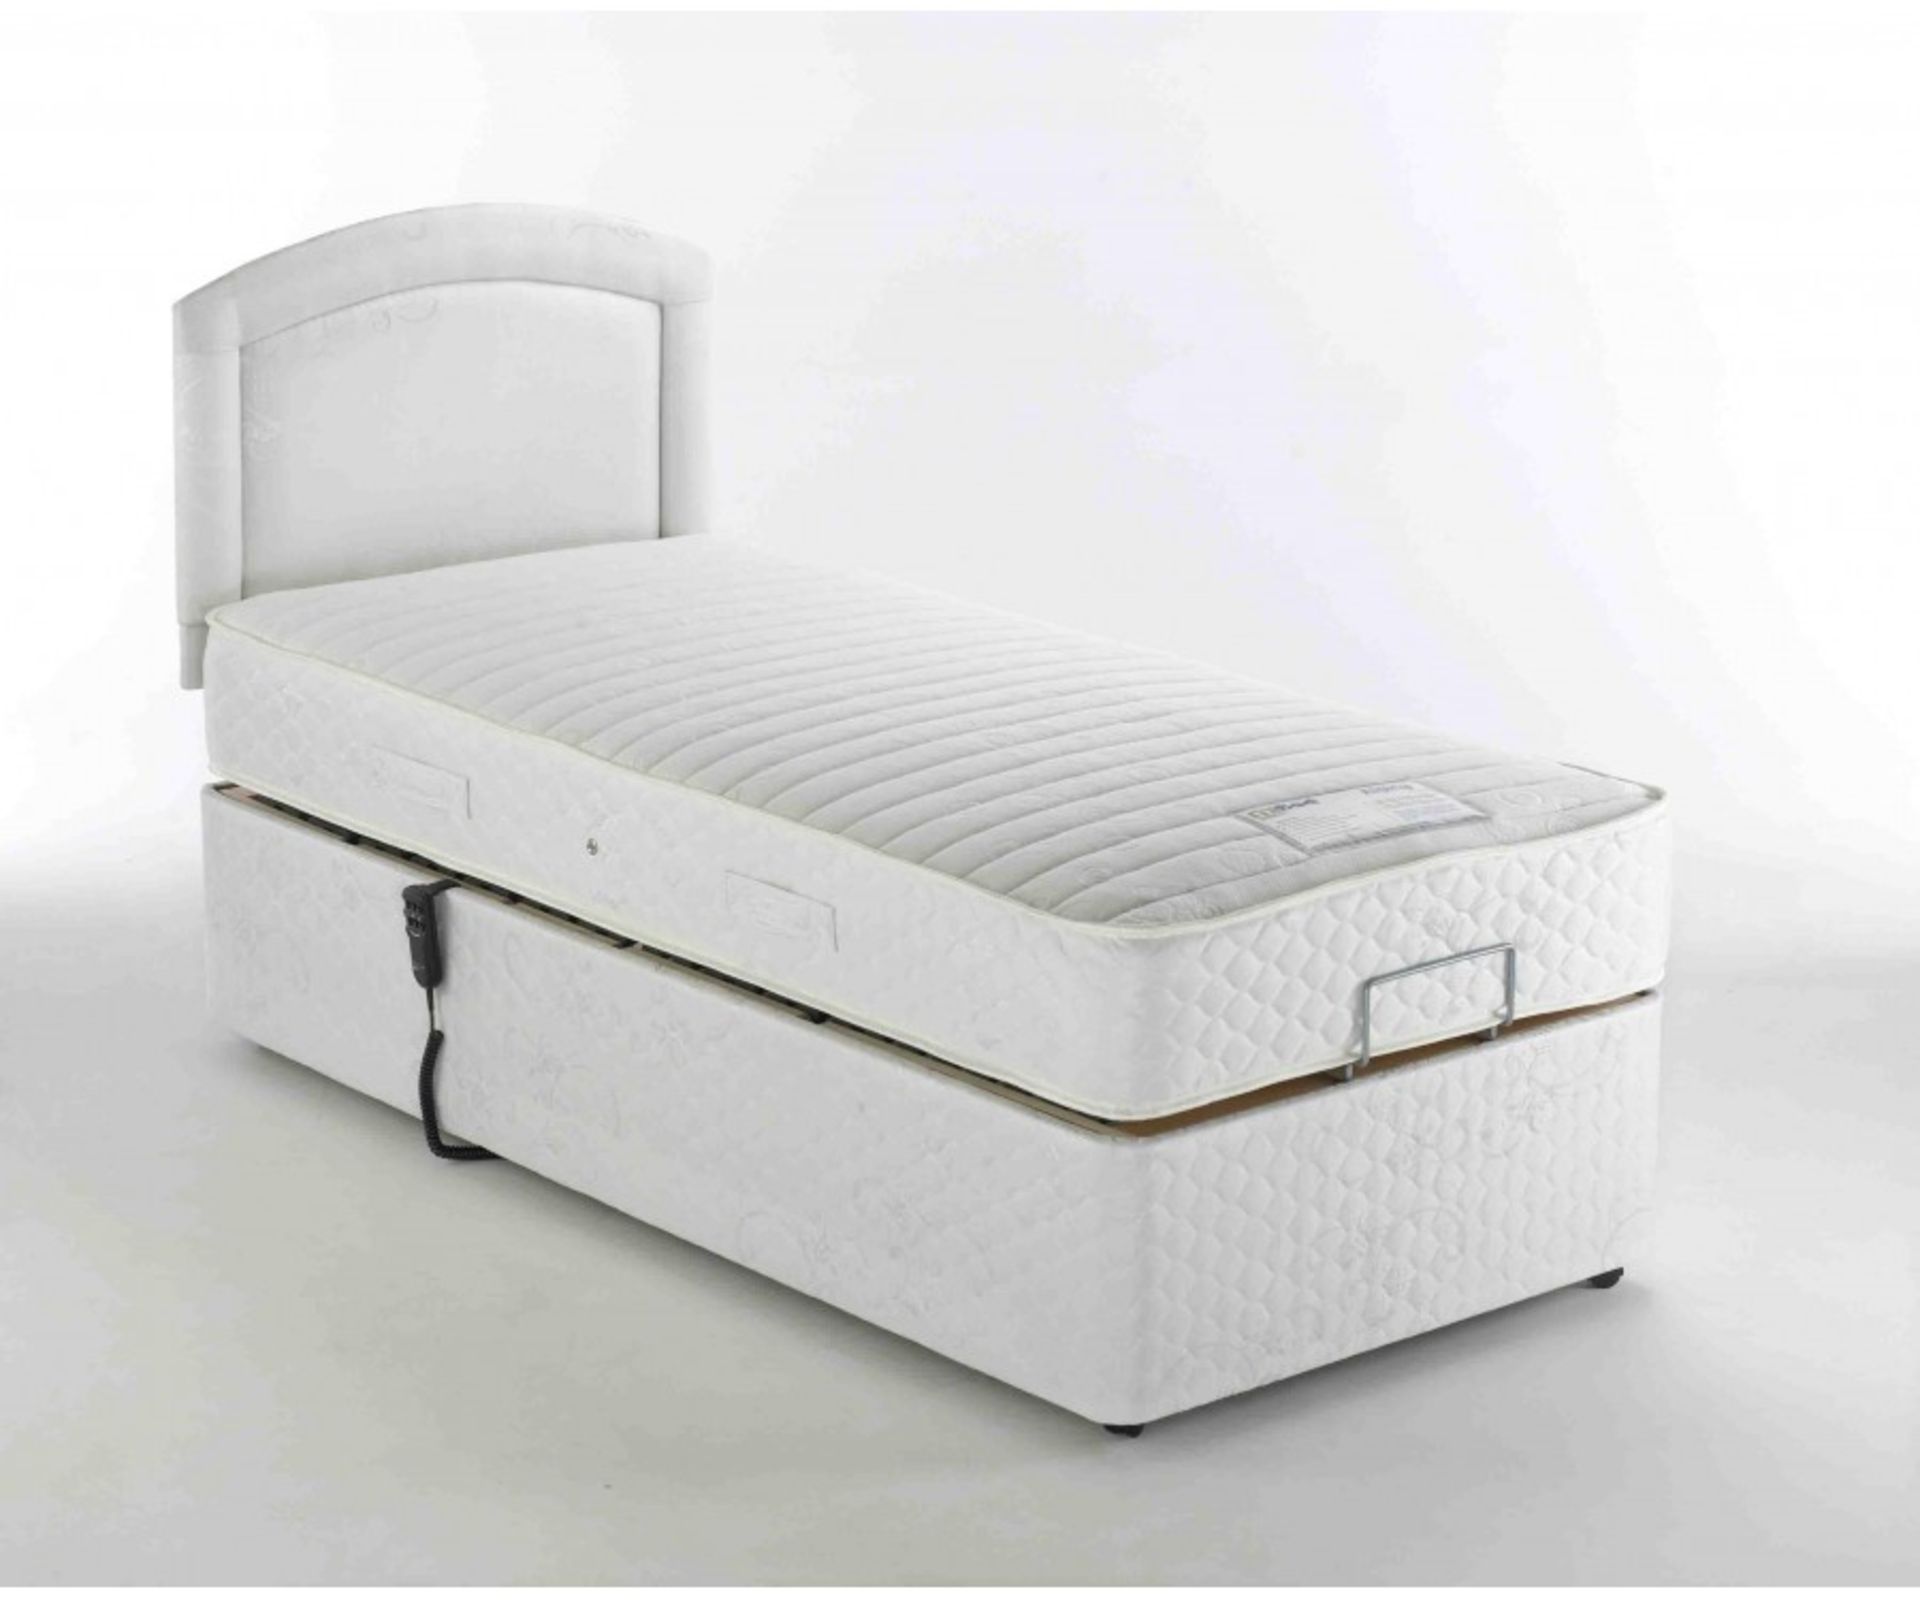 Brand New 3'0 (Single) Electric Adjustable Bed With 1000 Pocket Sprung Mattress